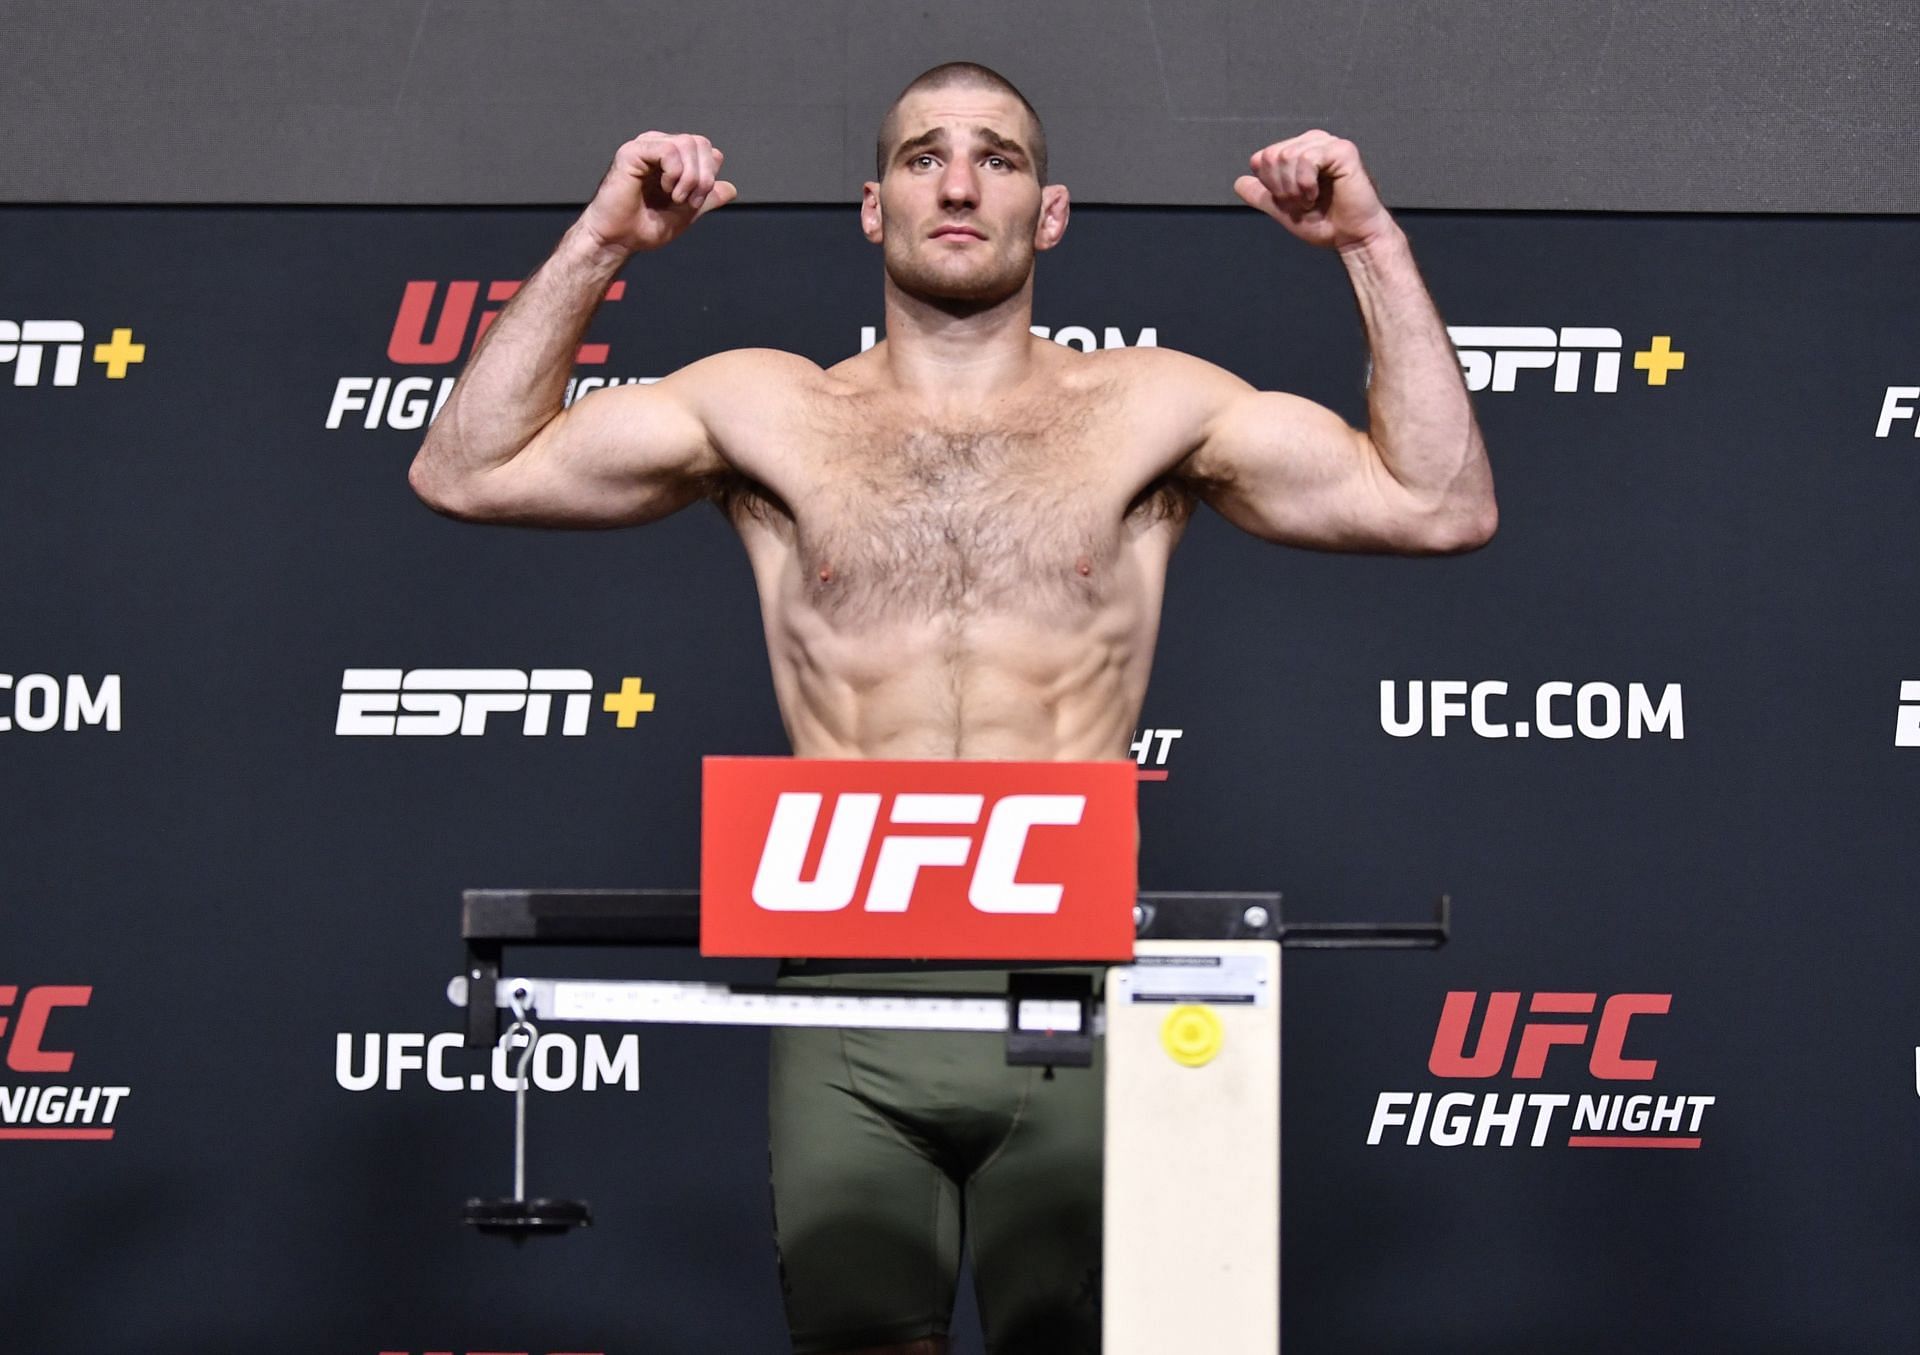 Sean Strickland will return to the octagon on February 5th